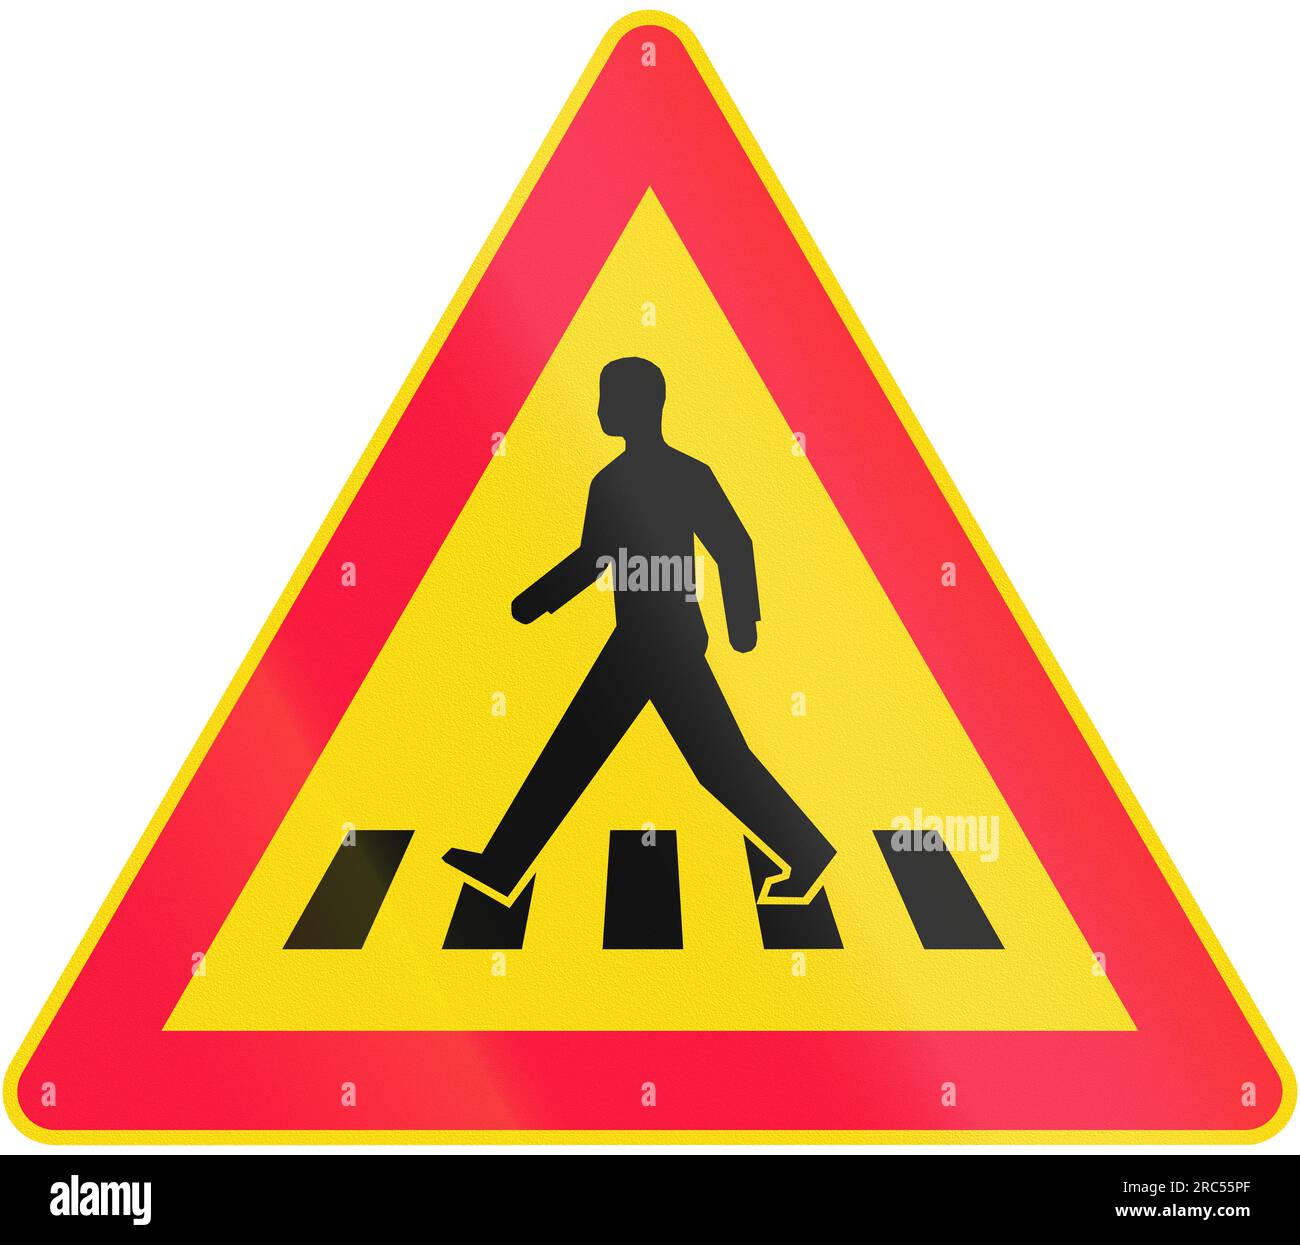 Road sign 151 in Finland - Pedestrian crossing Stock Photo